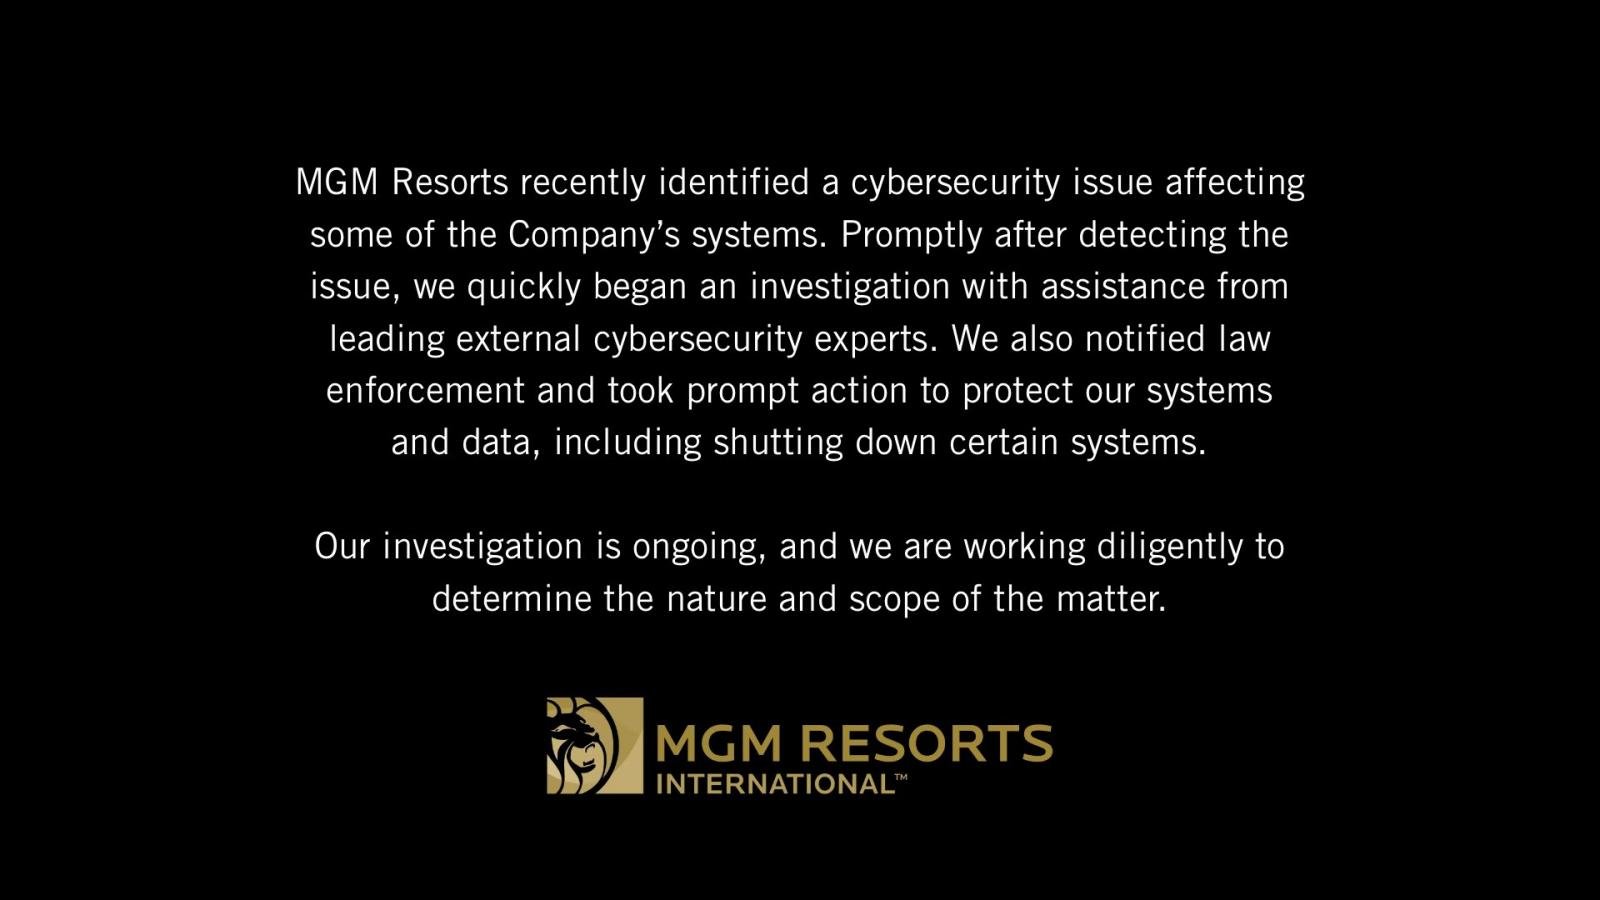 MGM Resorts shuts down IT systems after cyberattack - Figure 1